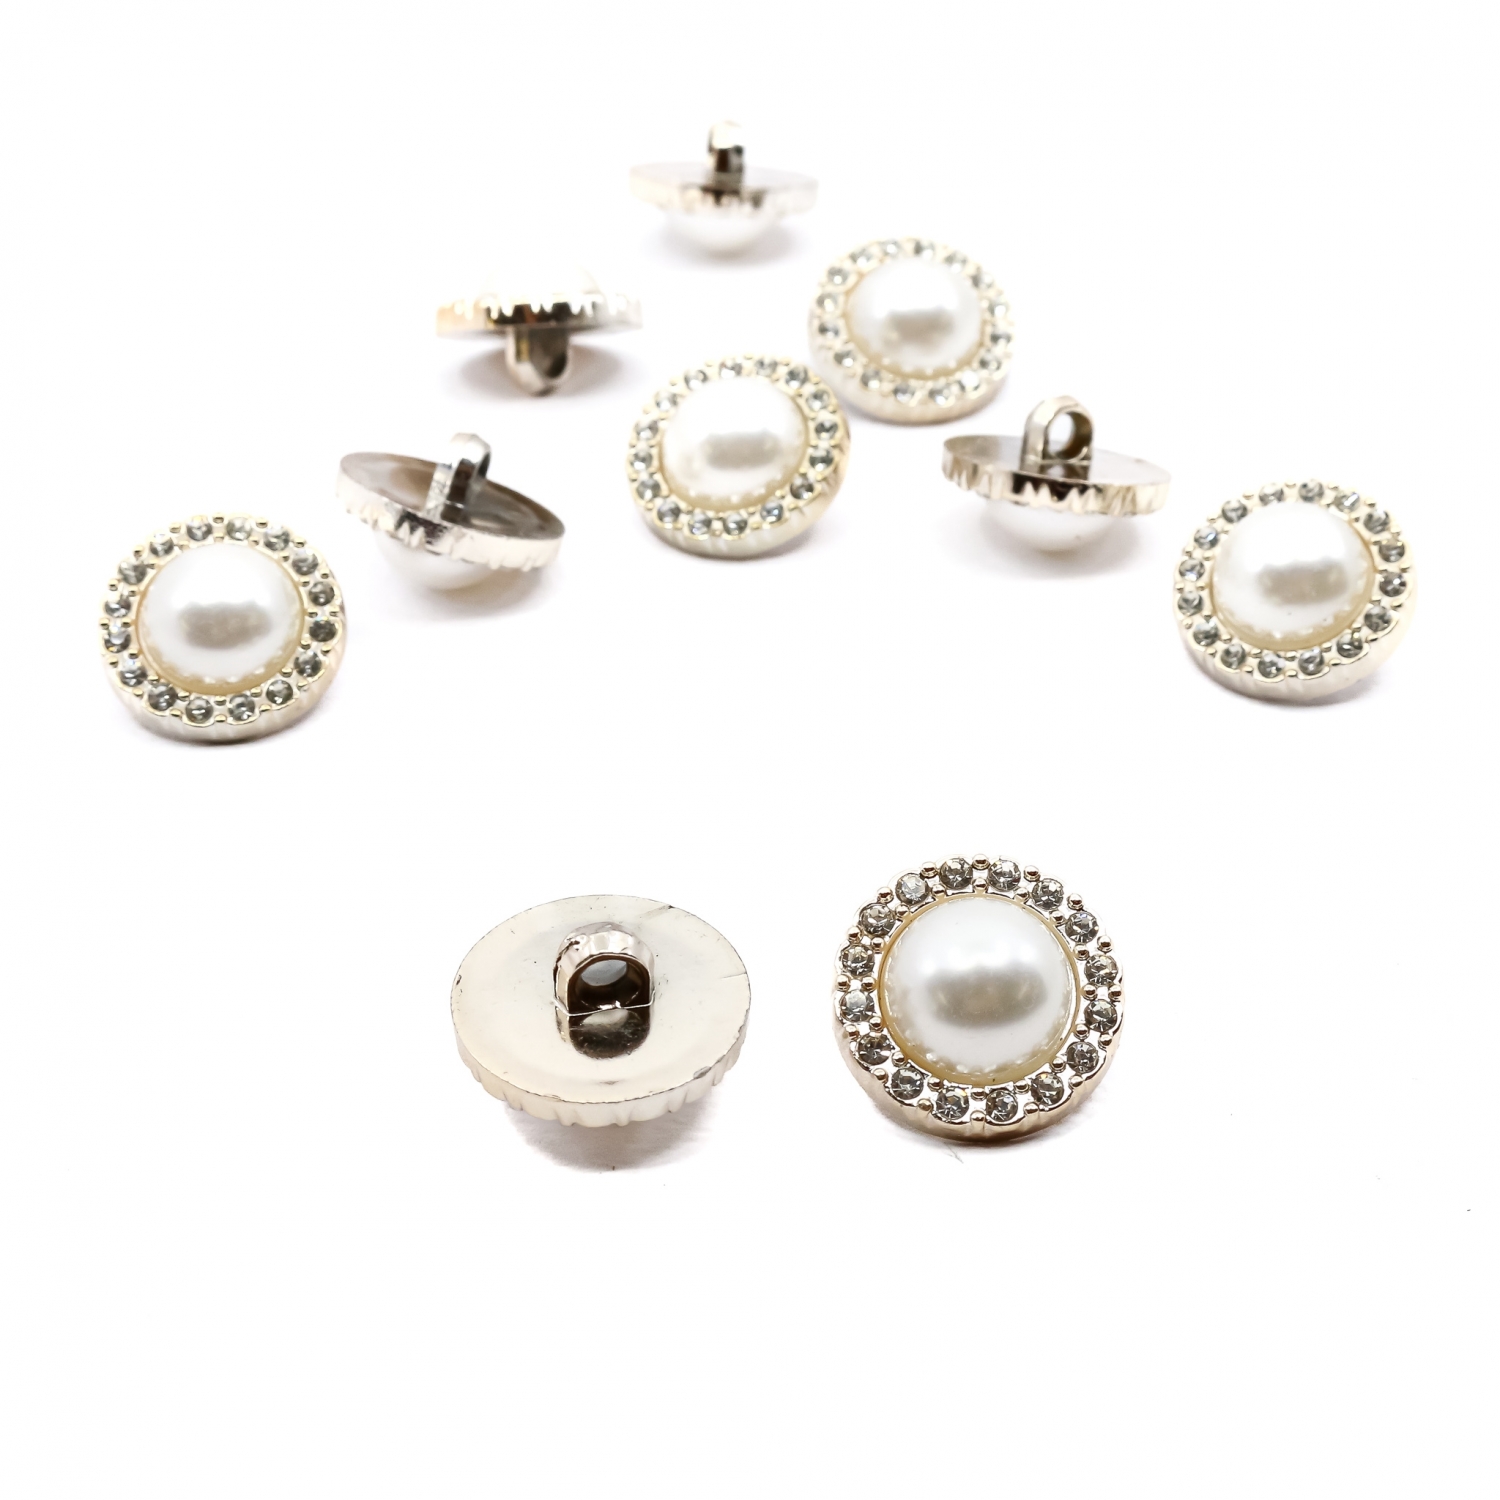 Pearl and Rhinestones Shank Buttons, 21 mm (100 pcs/pack) Code: 809/34